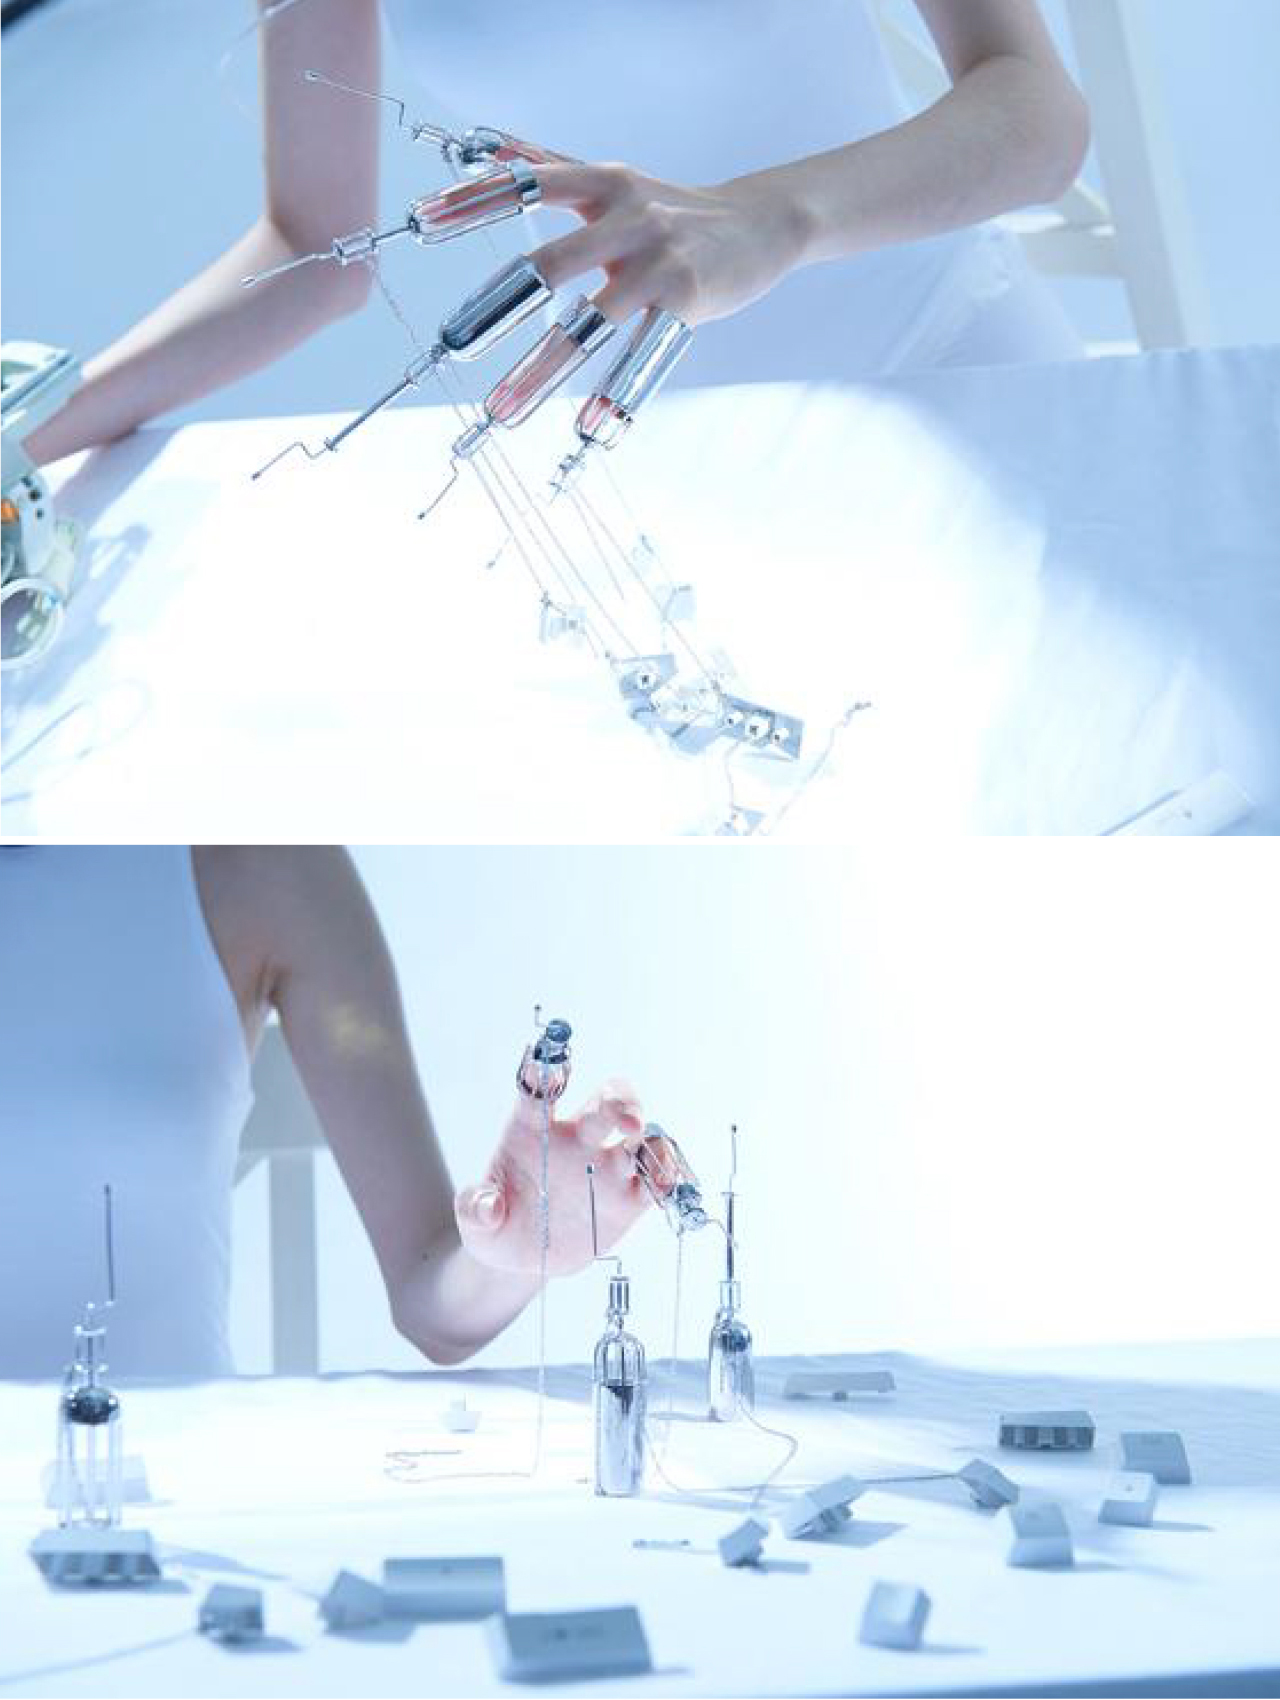 Two photos, stacked, of a young woman's hands with syringe-like objects attached to her fingers